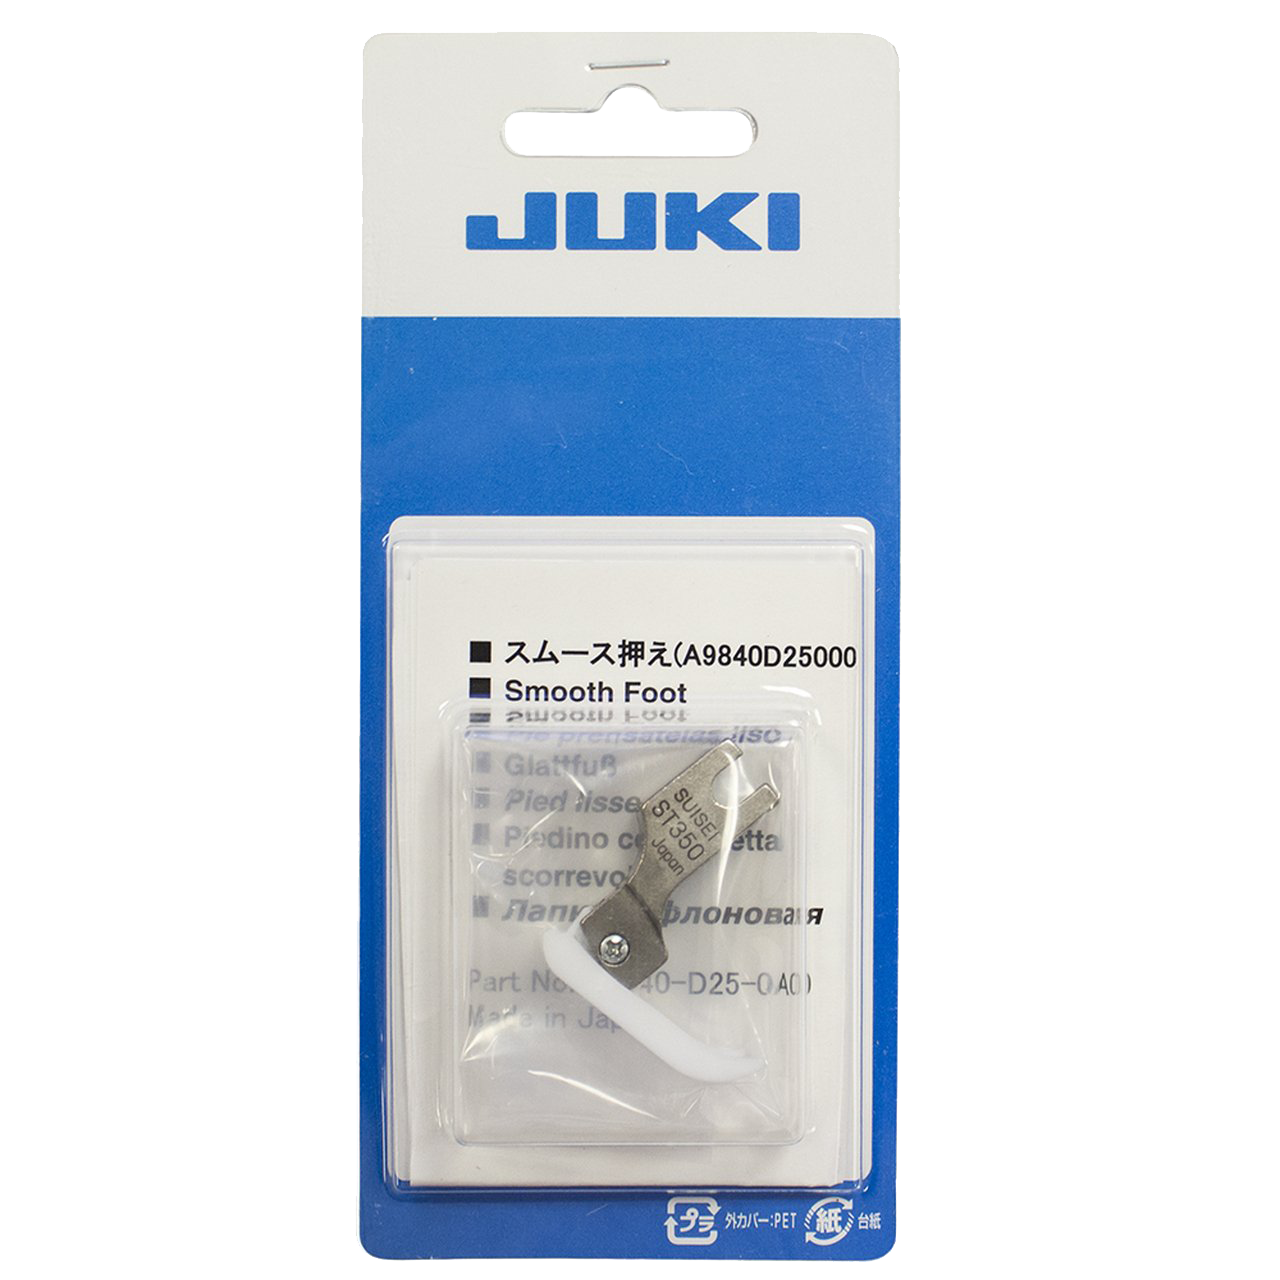 JUKI Smooth Foot for TL Series A9840D250A0 for Sale at World Weidner